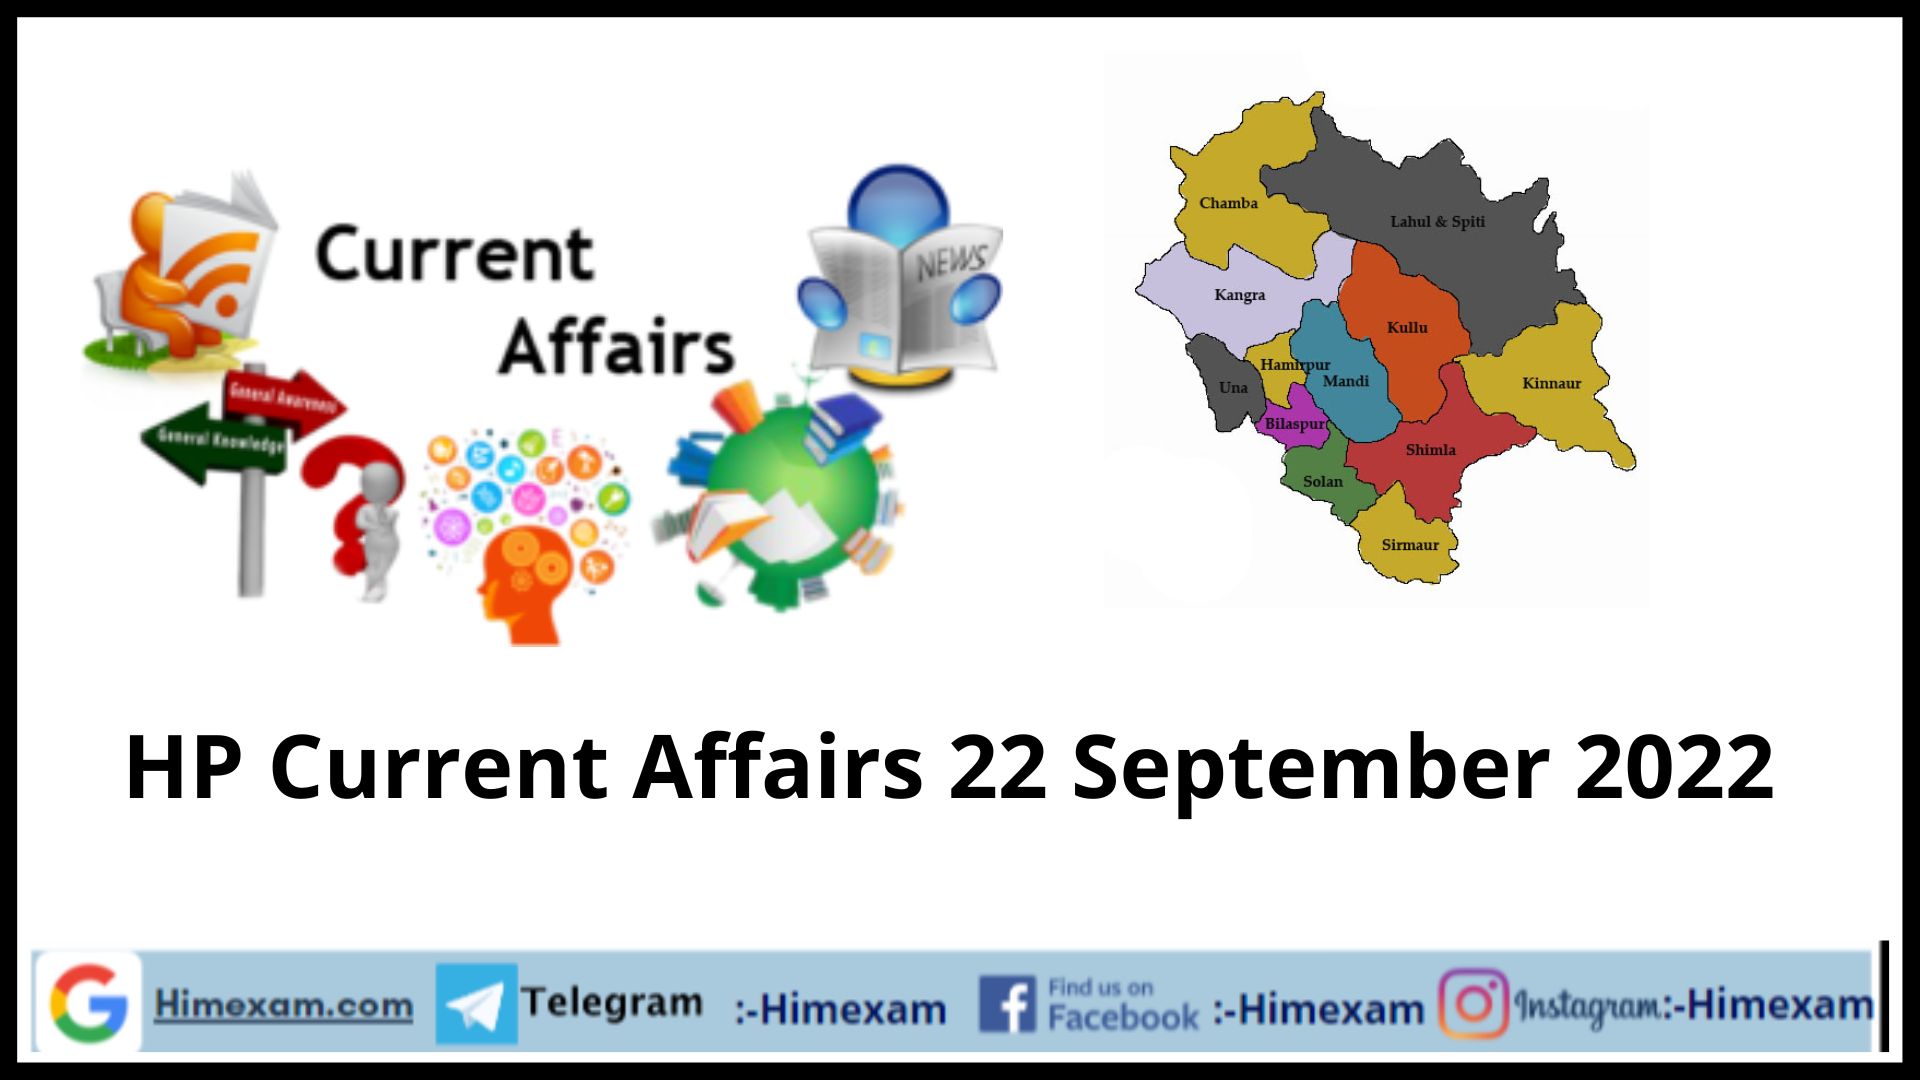 HP Current Affairs 22 September 2022